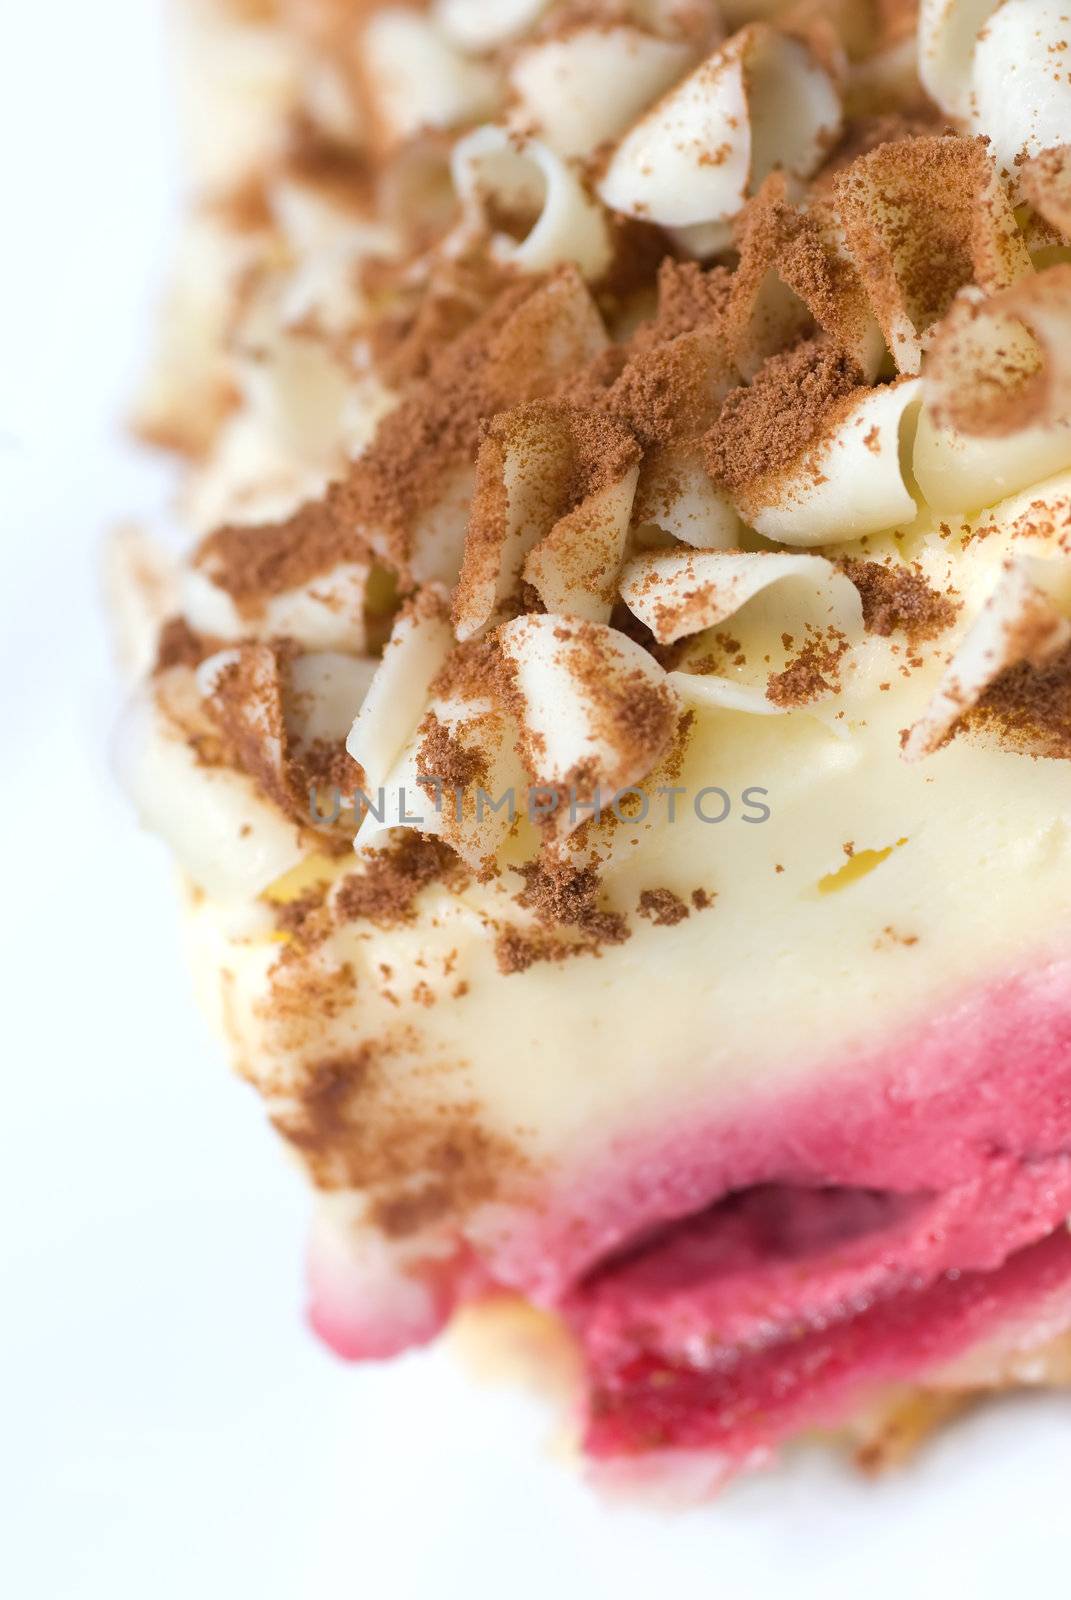 A slice of raspberry cheesecake with white chocolate shavings and chocolate dust toppings